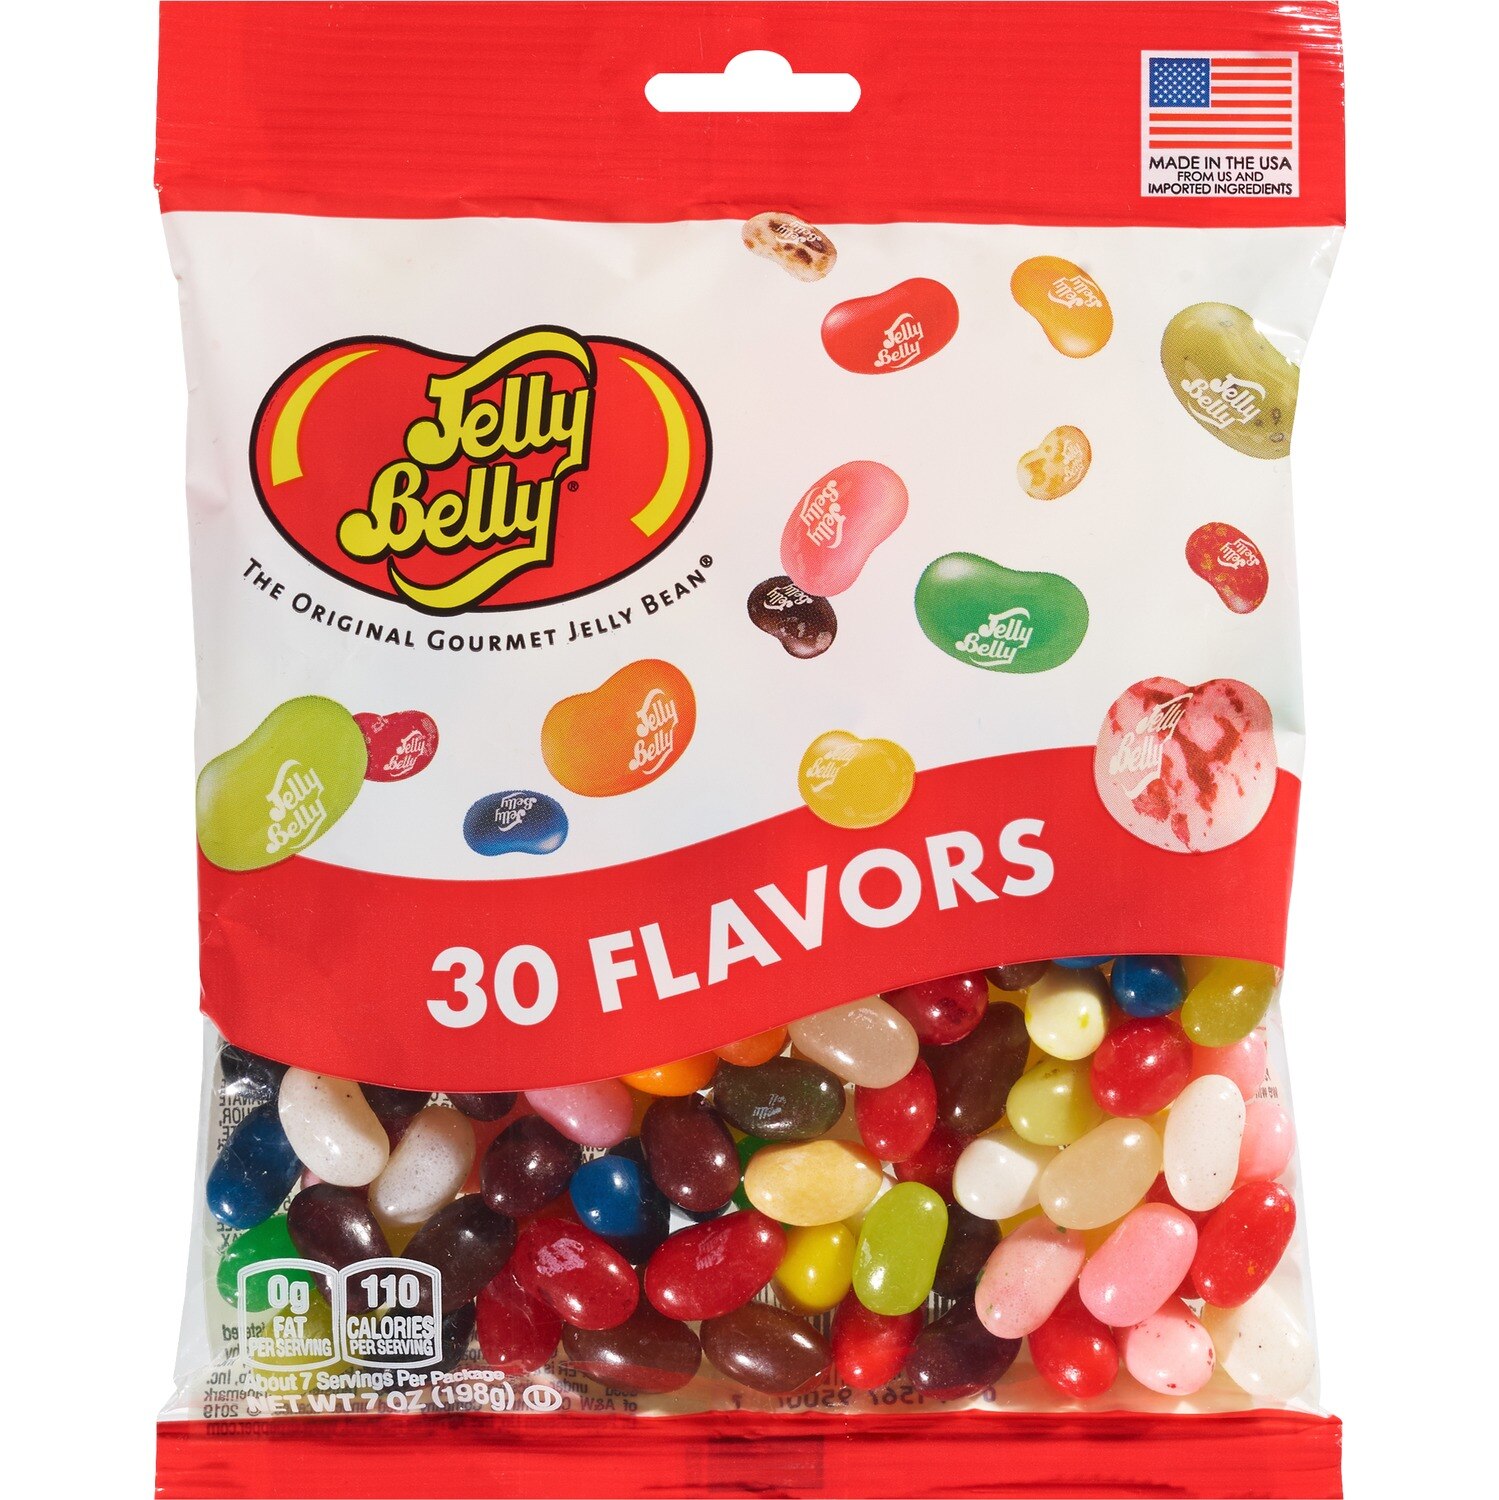 Jelly Belly - Caramelos masticables gourmet, 30 sabores